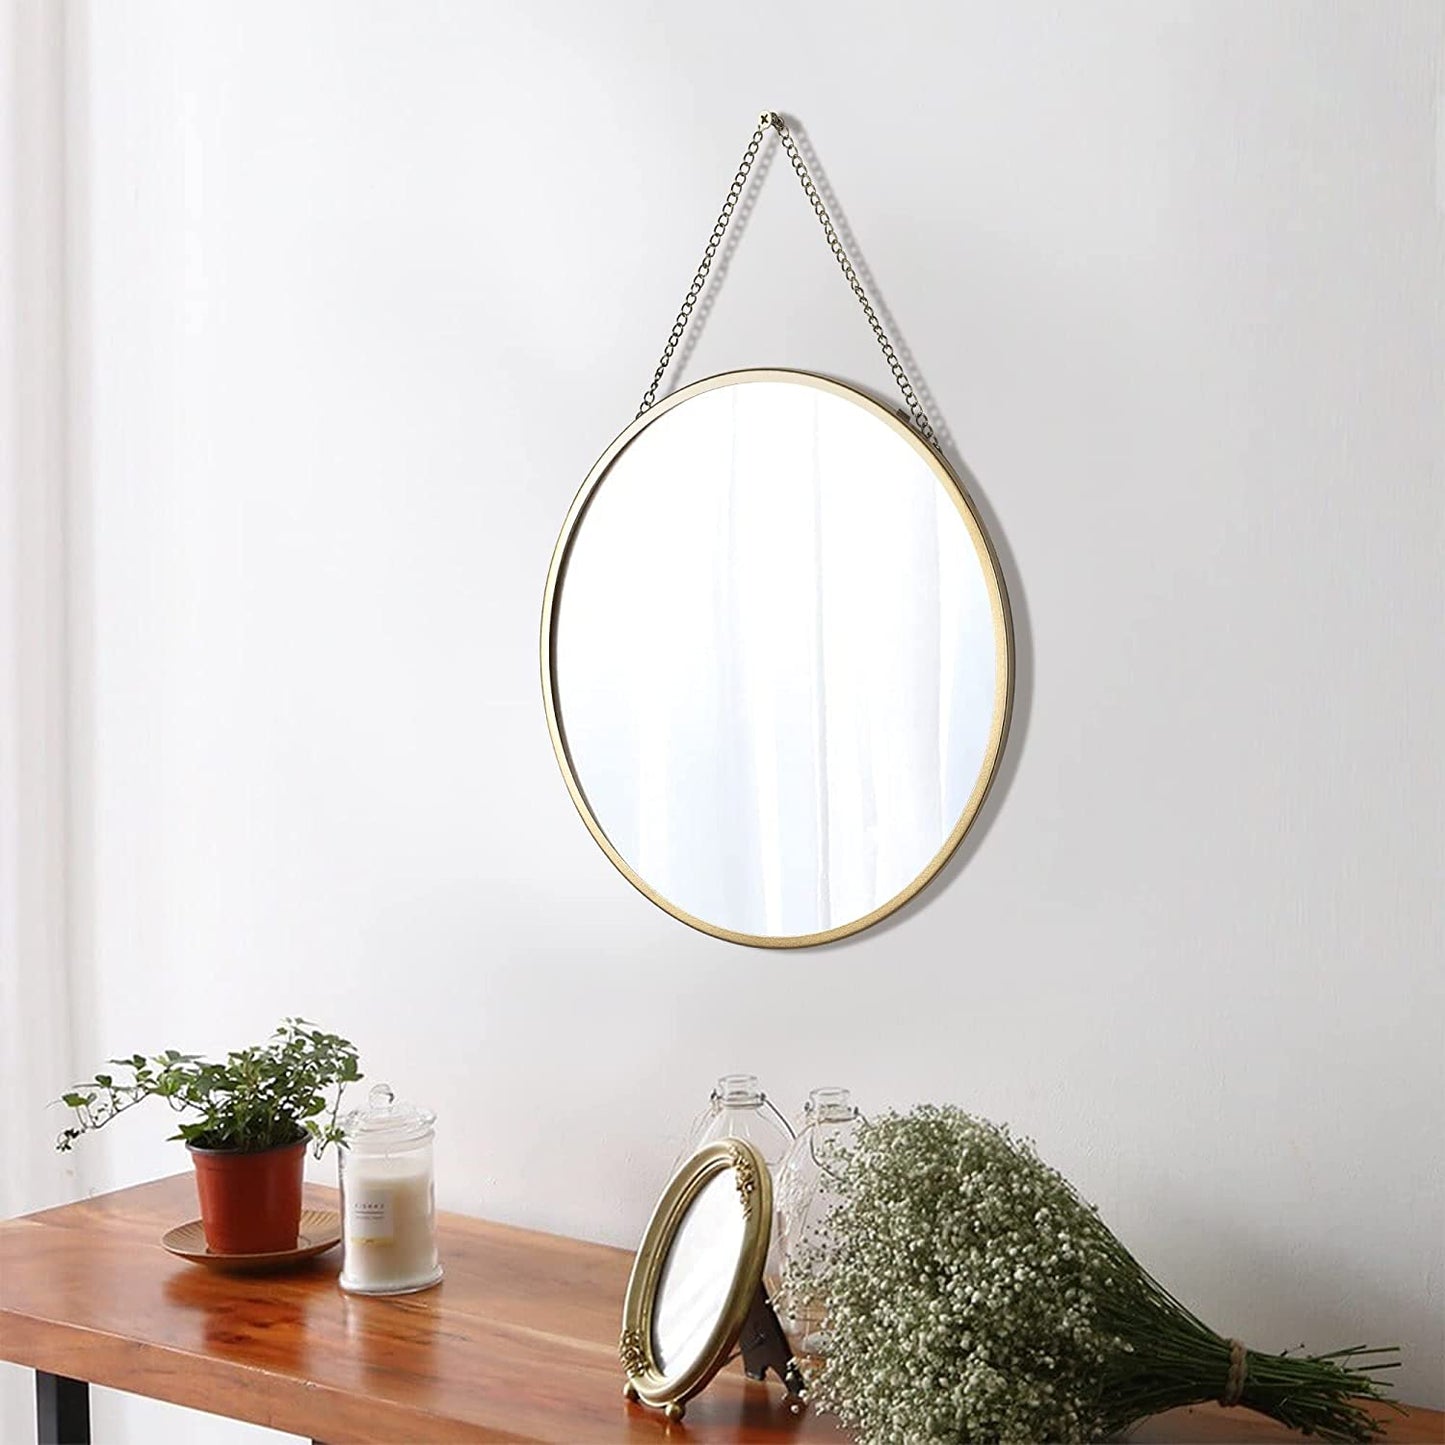 Hanging Circle Mirror Wall Decor Gold round Mirror with Hanging Chain for Bathroom, Bedroom, Vanity, Living Room, Entryway, 10 Inch X 10 Inch